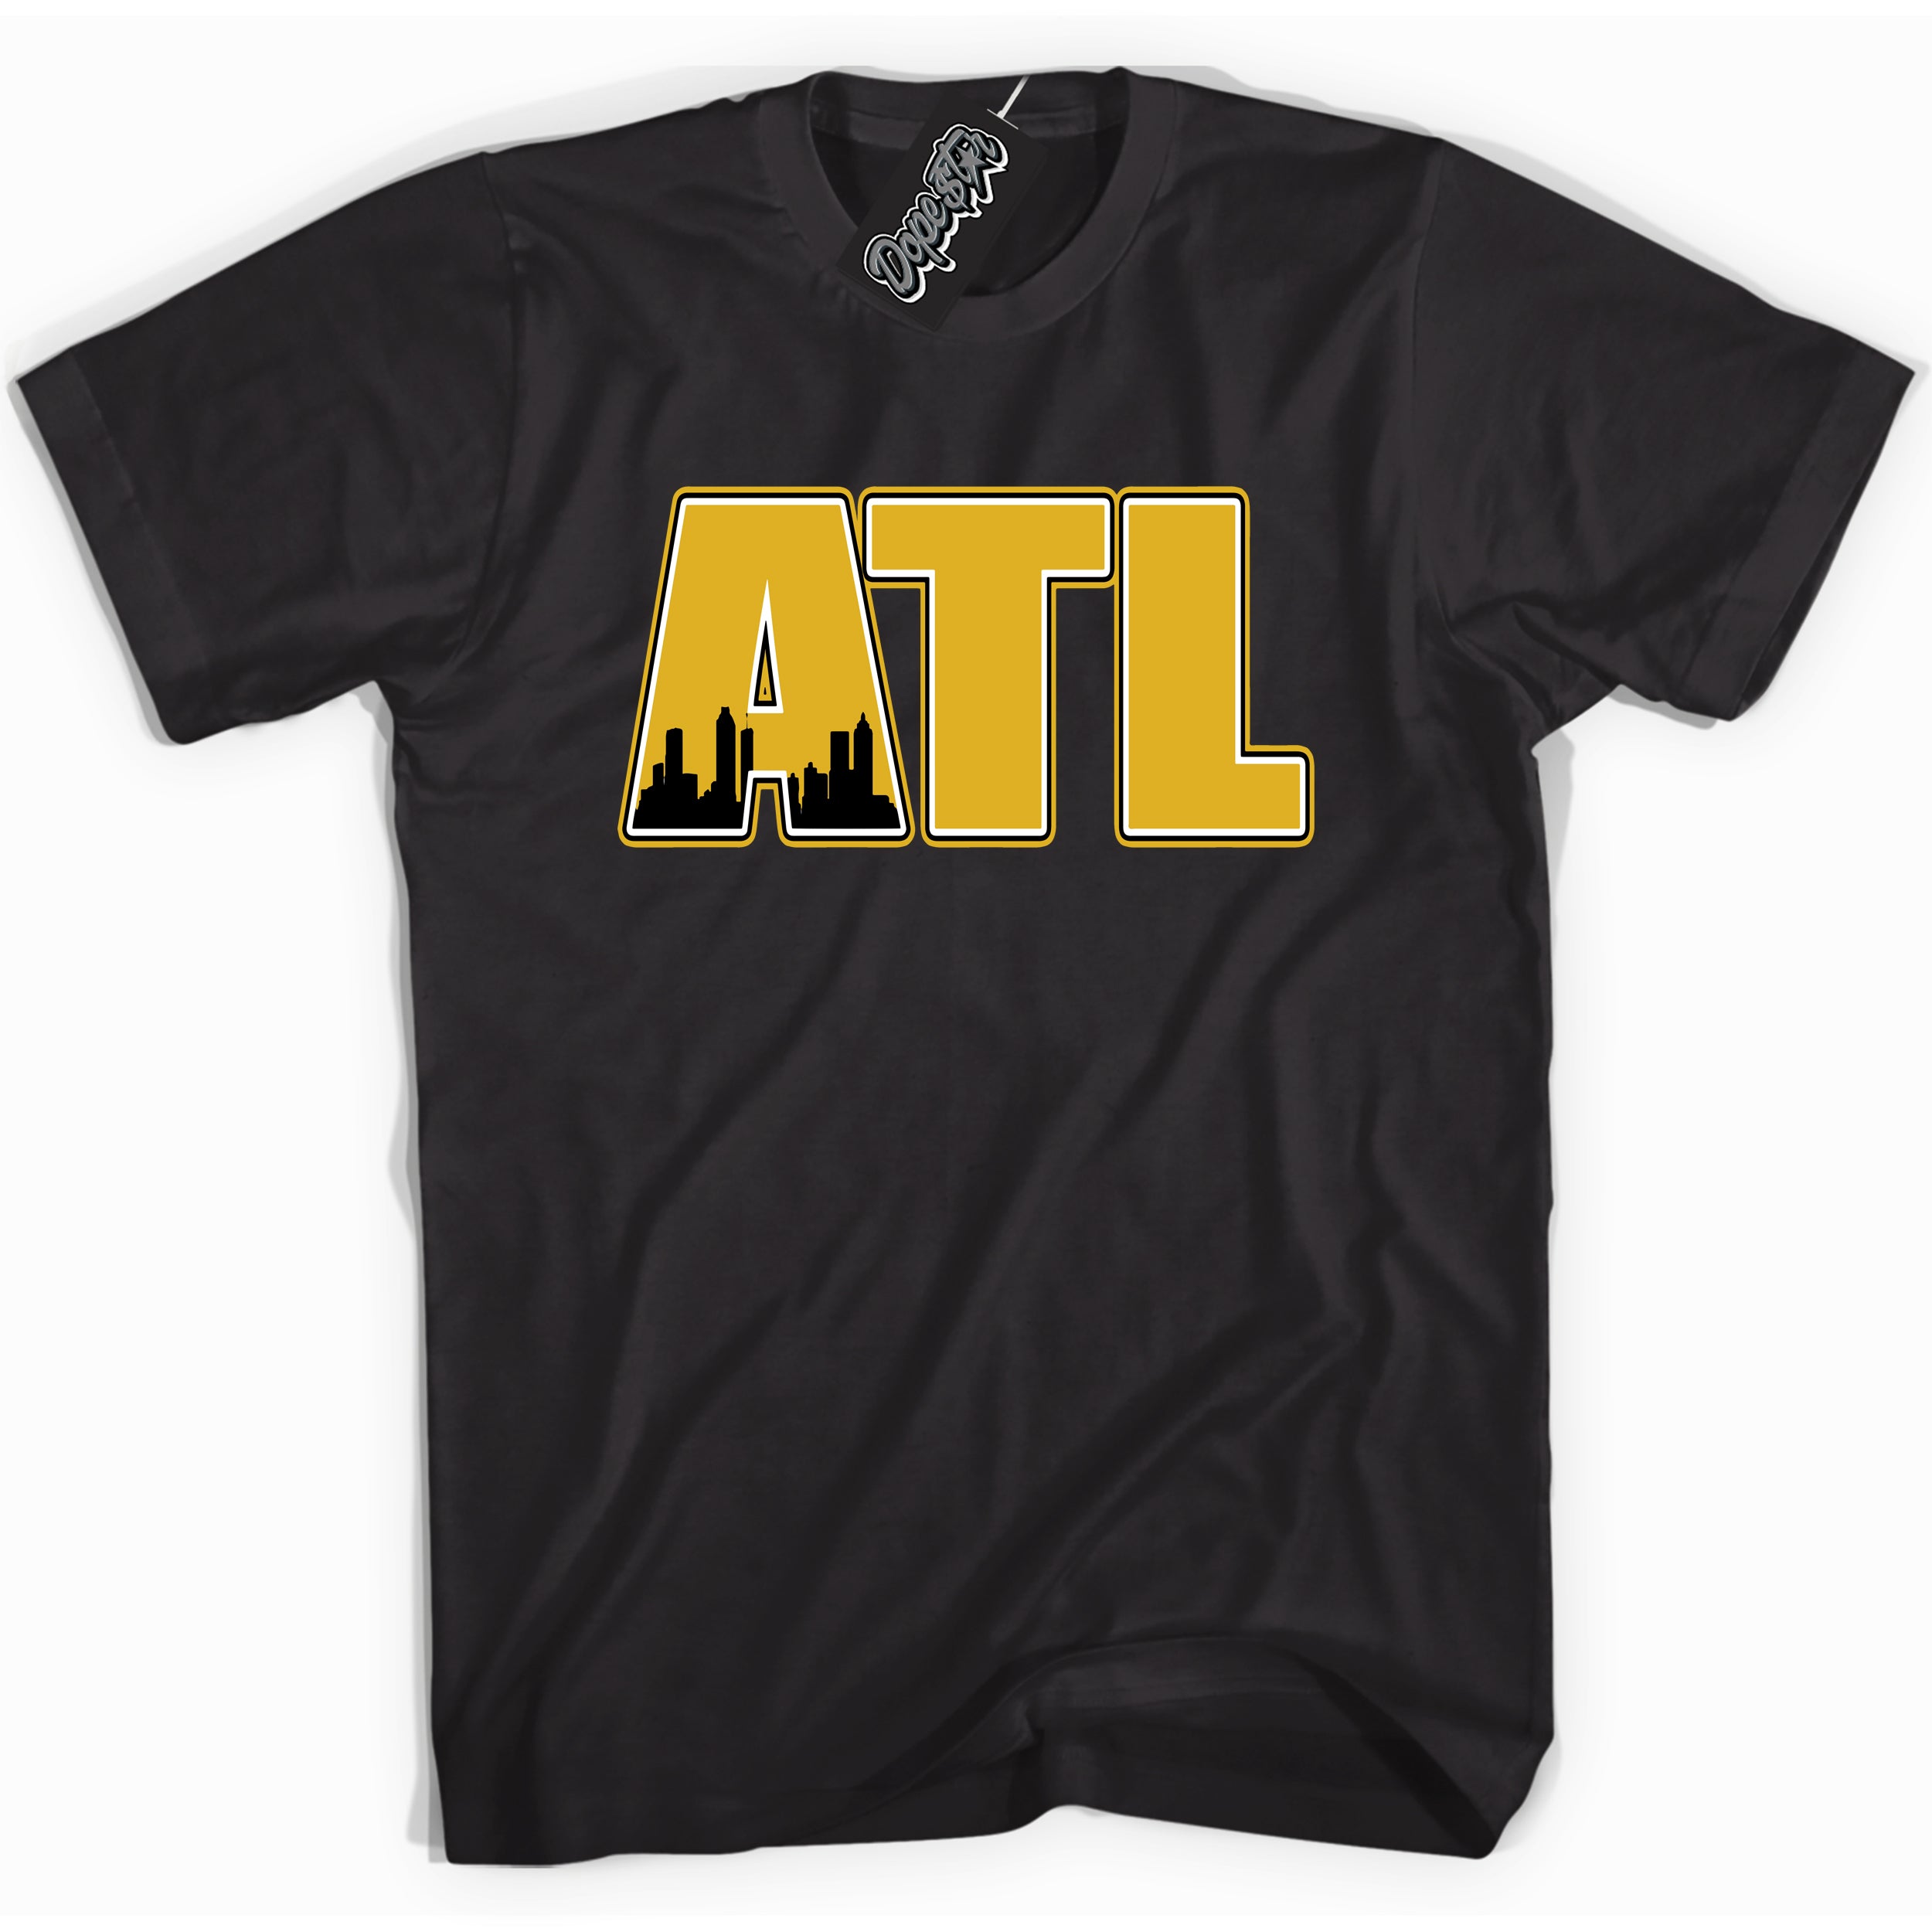 Cool Black Shirt with “ Atlanta” design that perfectly matches Yellow Ochre 6s Sneakers.